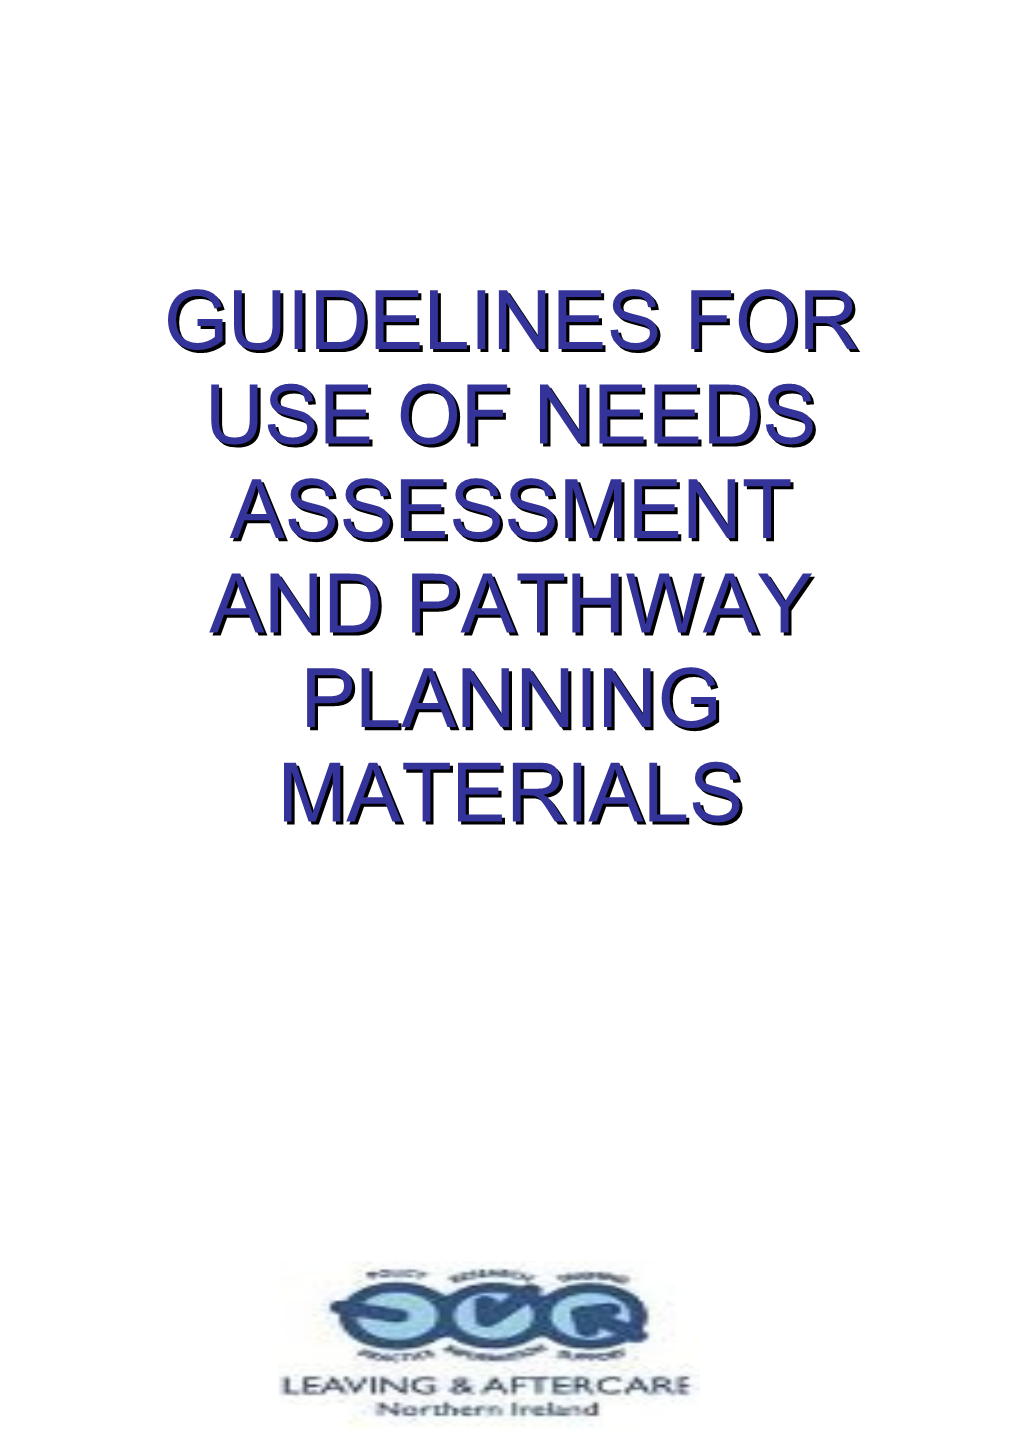 Guidelines for Use of Needs Assessment and Pathway Planning Materials